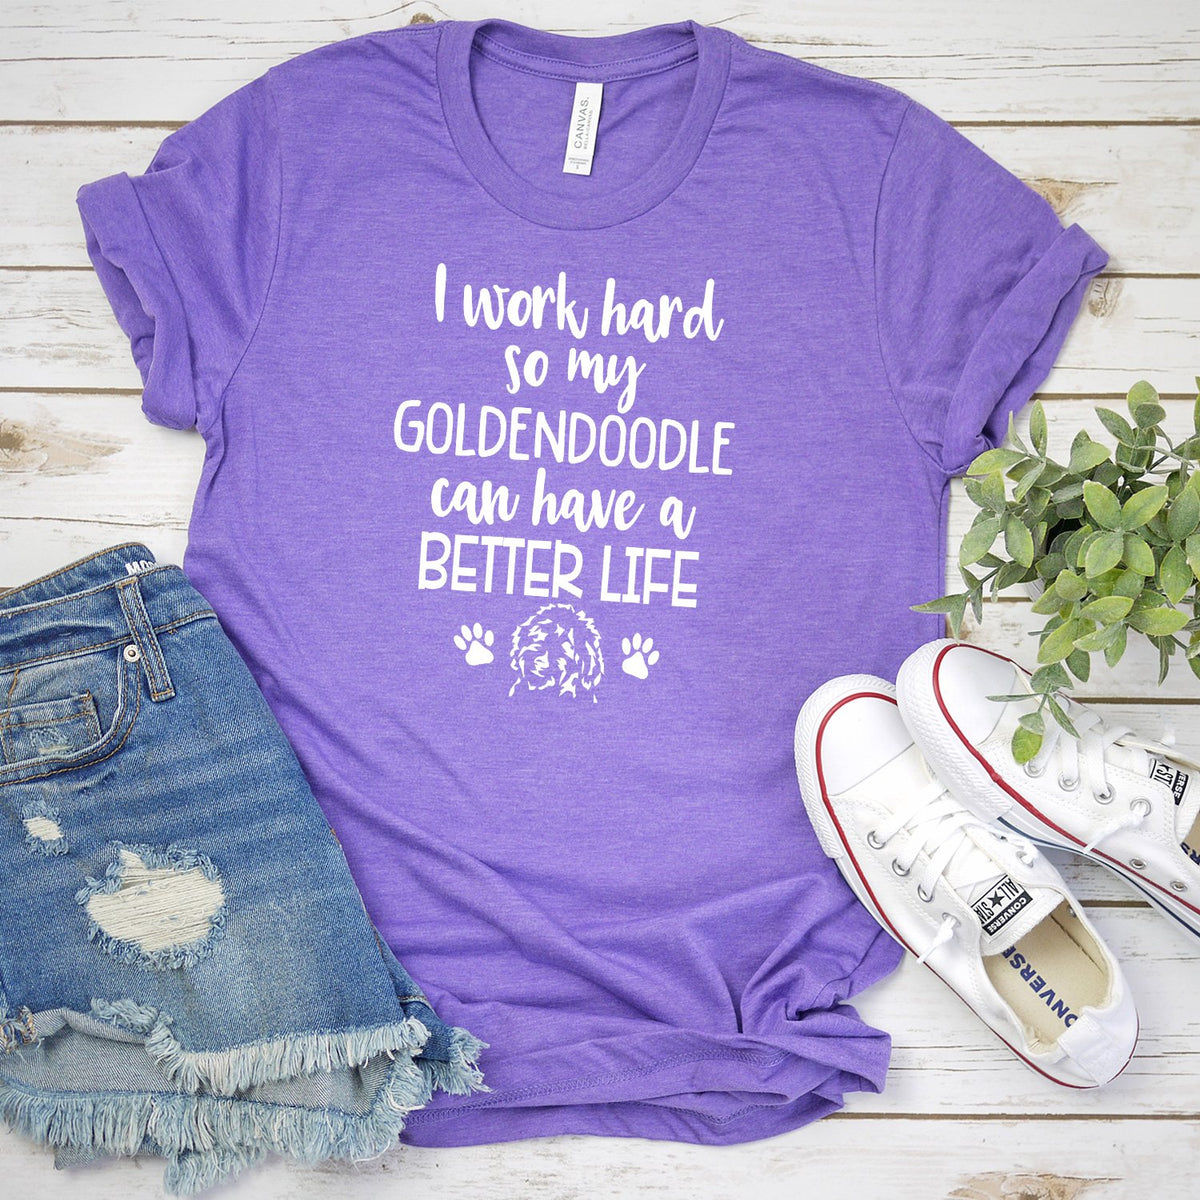 I Work Hard So My Goldendoodle Can Have A Better Life - Short Sleeve Tee Shirt